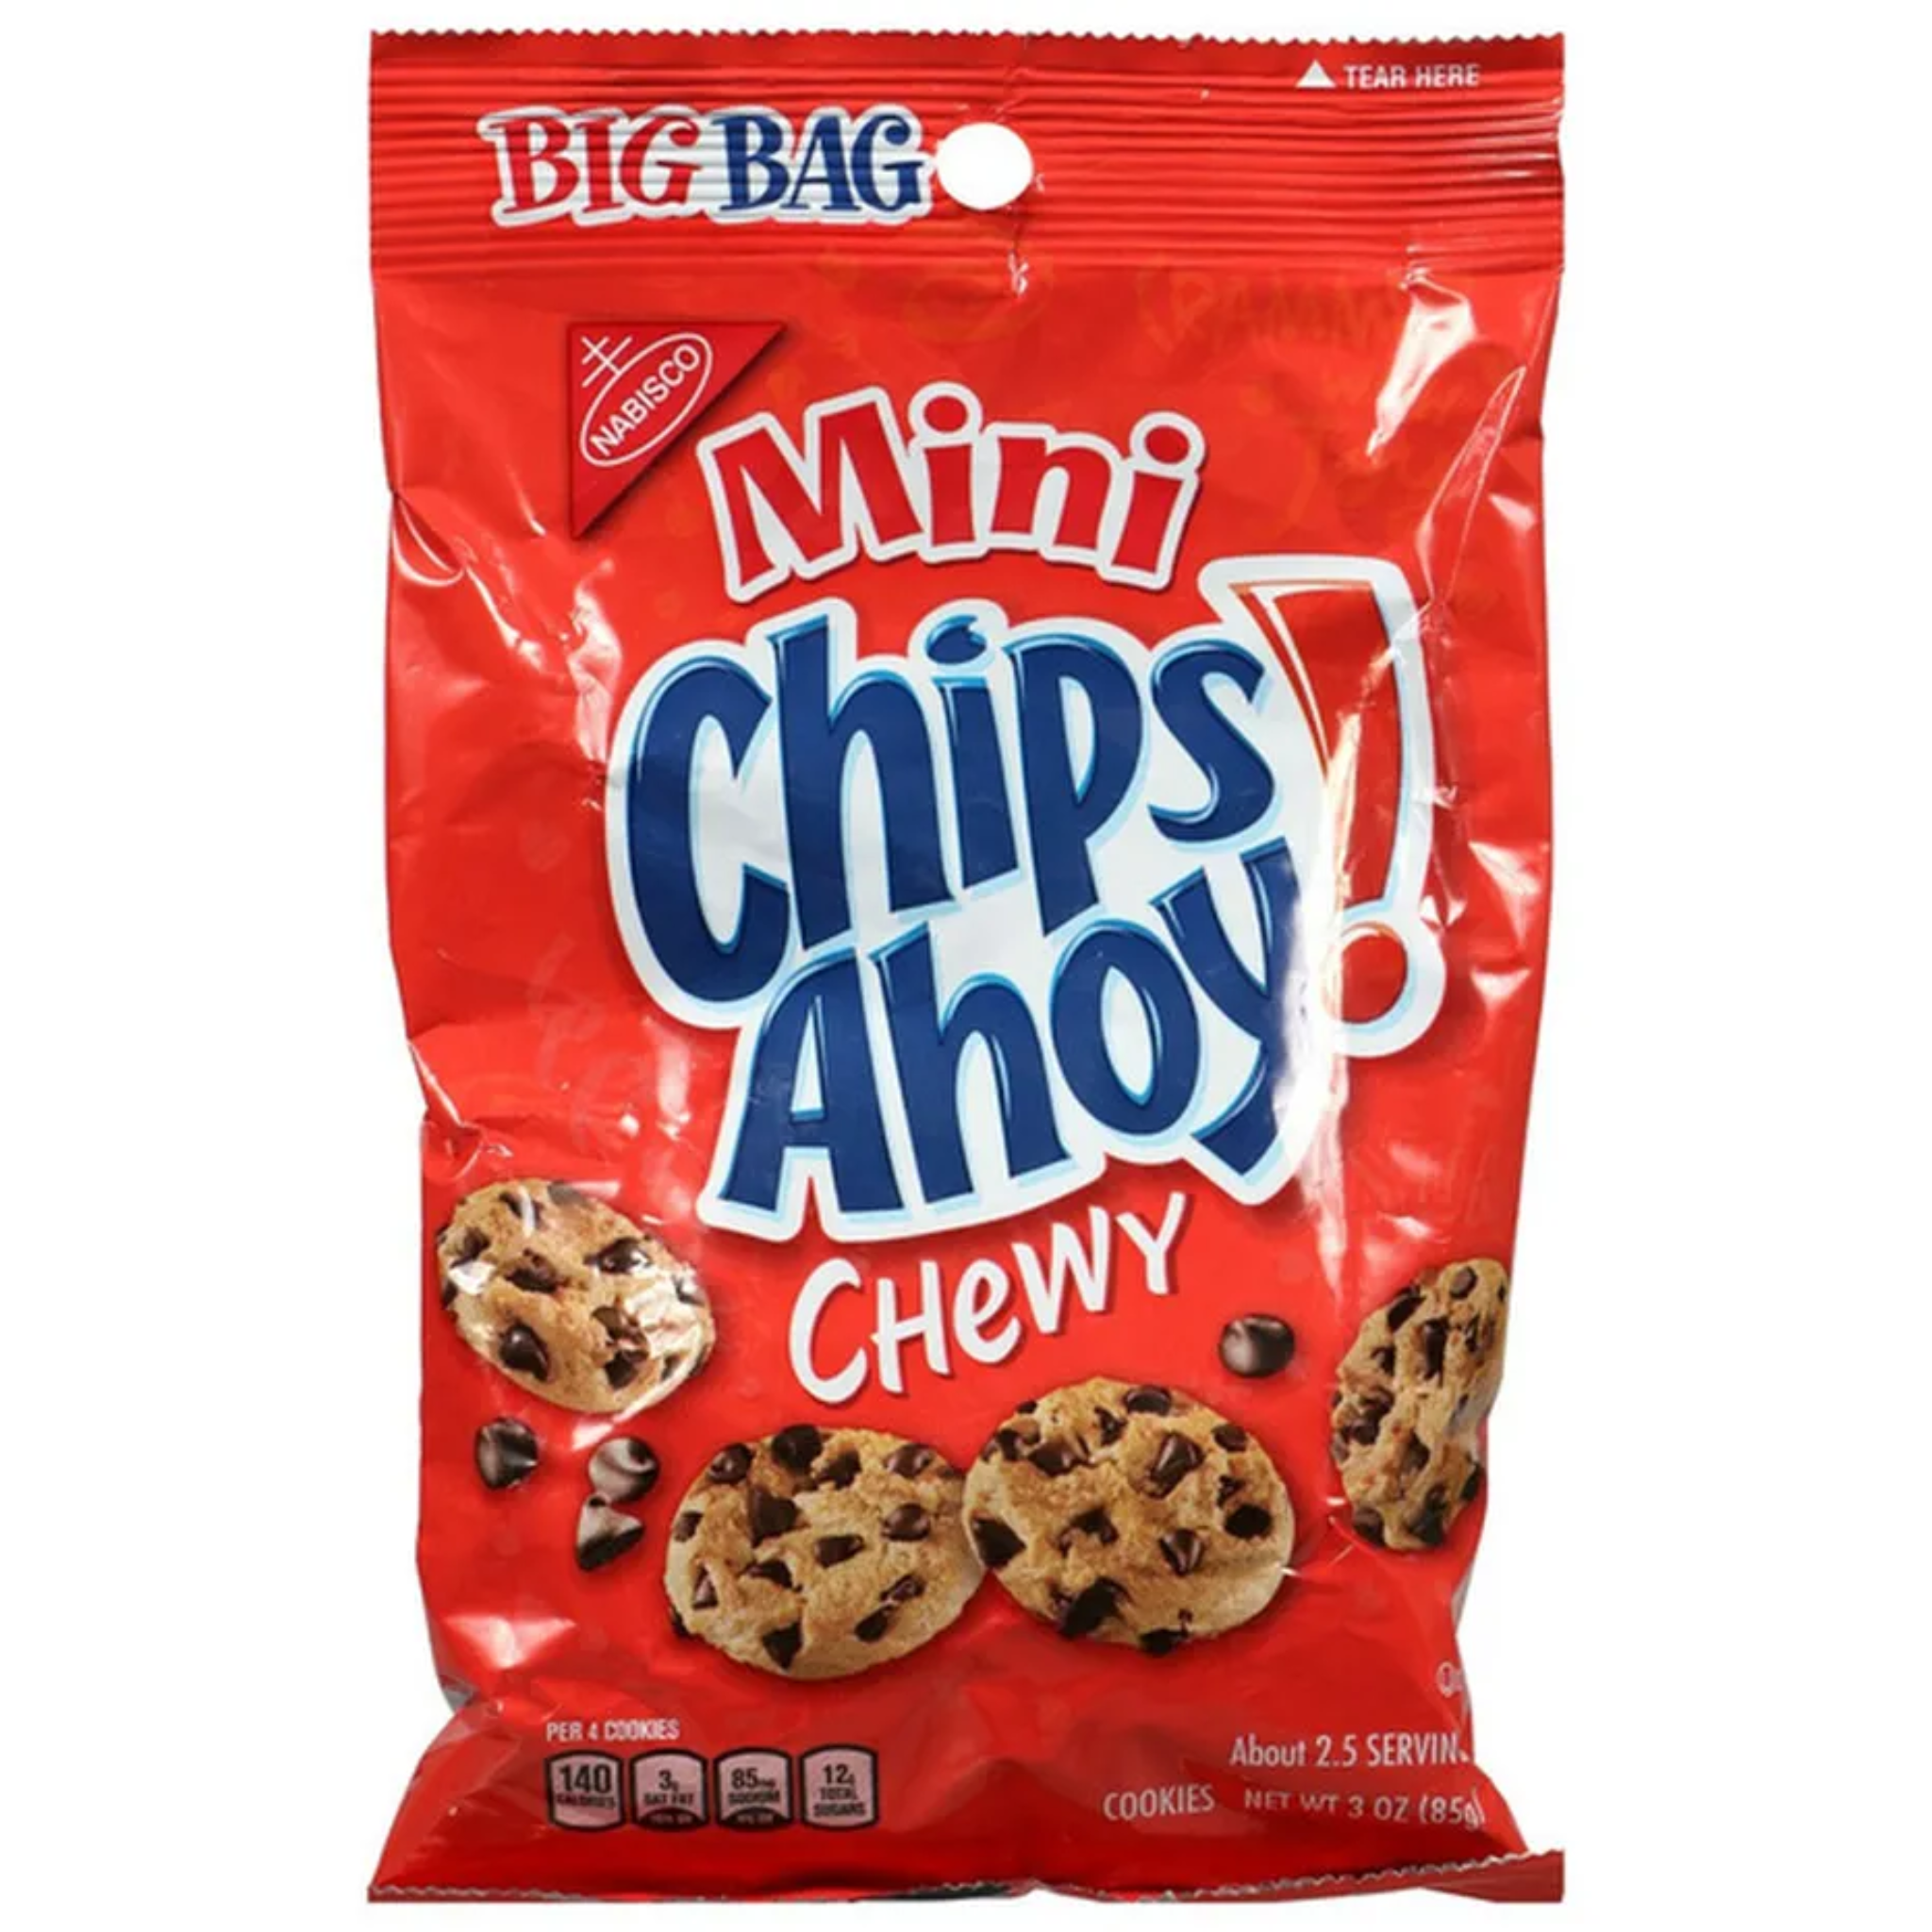 Mini Chips Ahoy Chewy